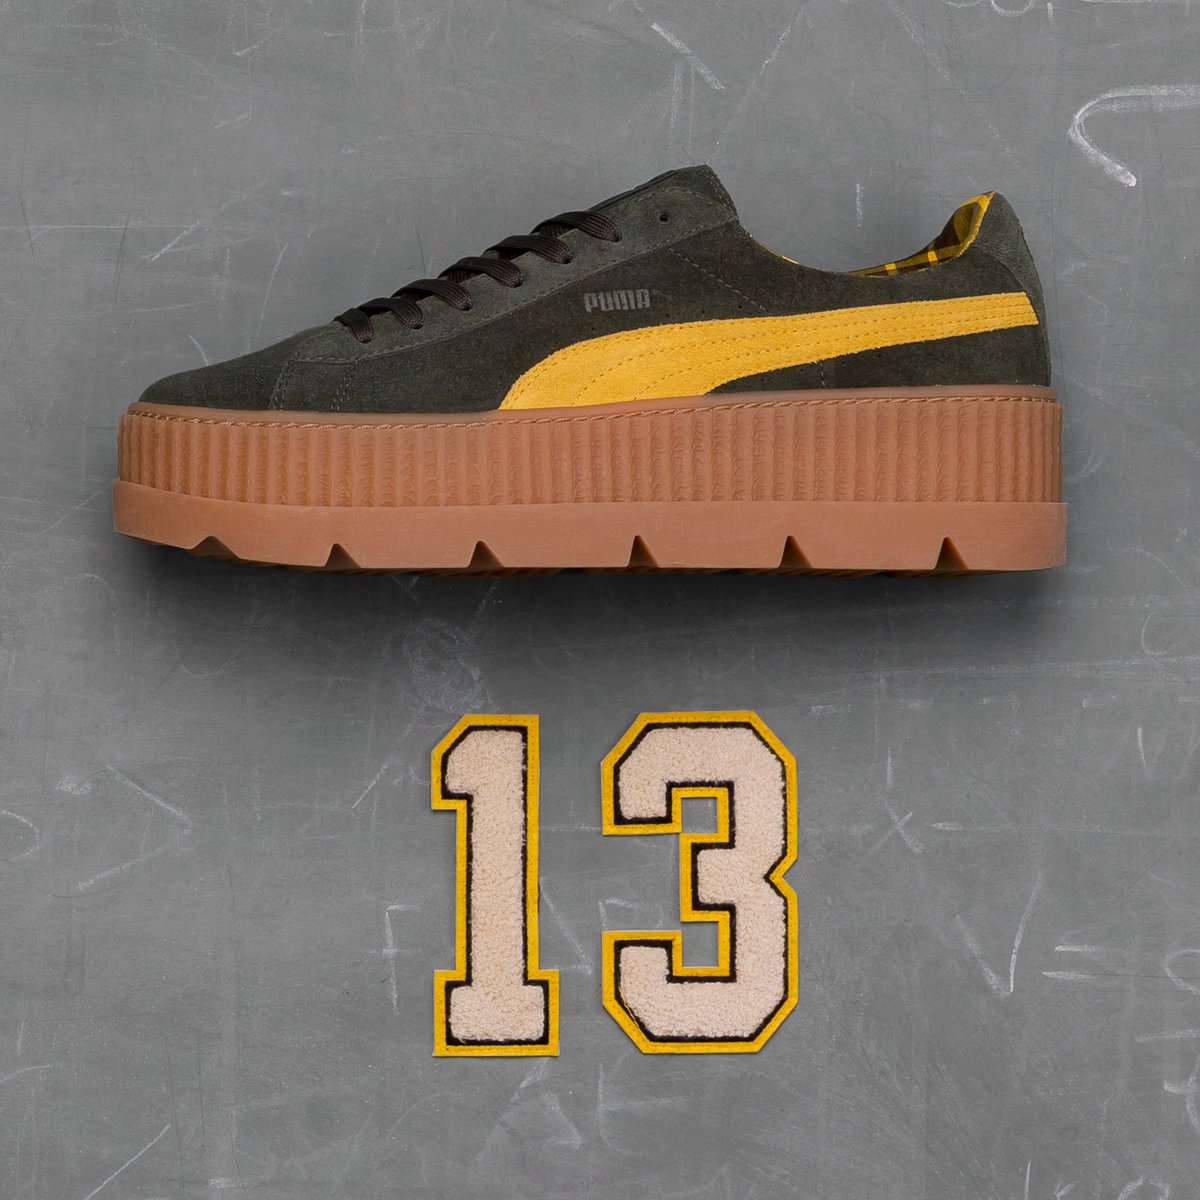 The #FENTYxPUMA Cleated Creeper is back in new colors TOMORROW Oct. 19th!! https://t.co/gr9JX6Ukcg